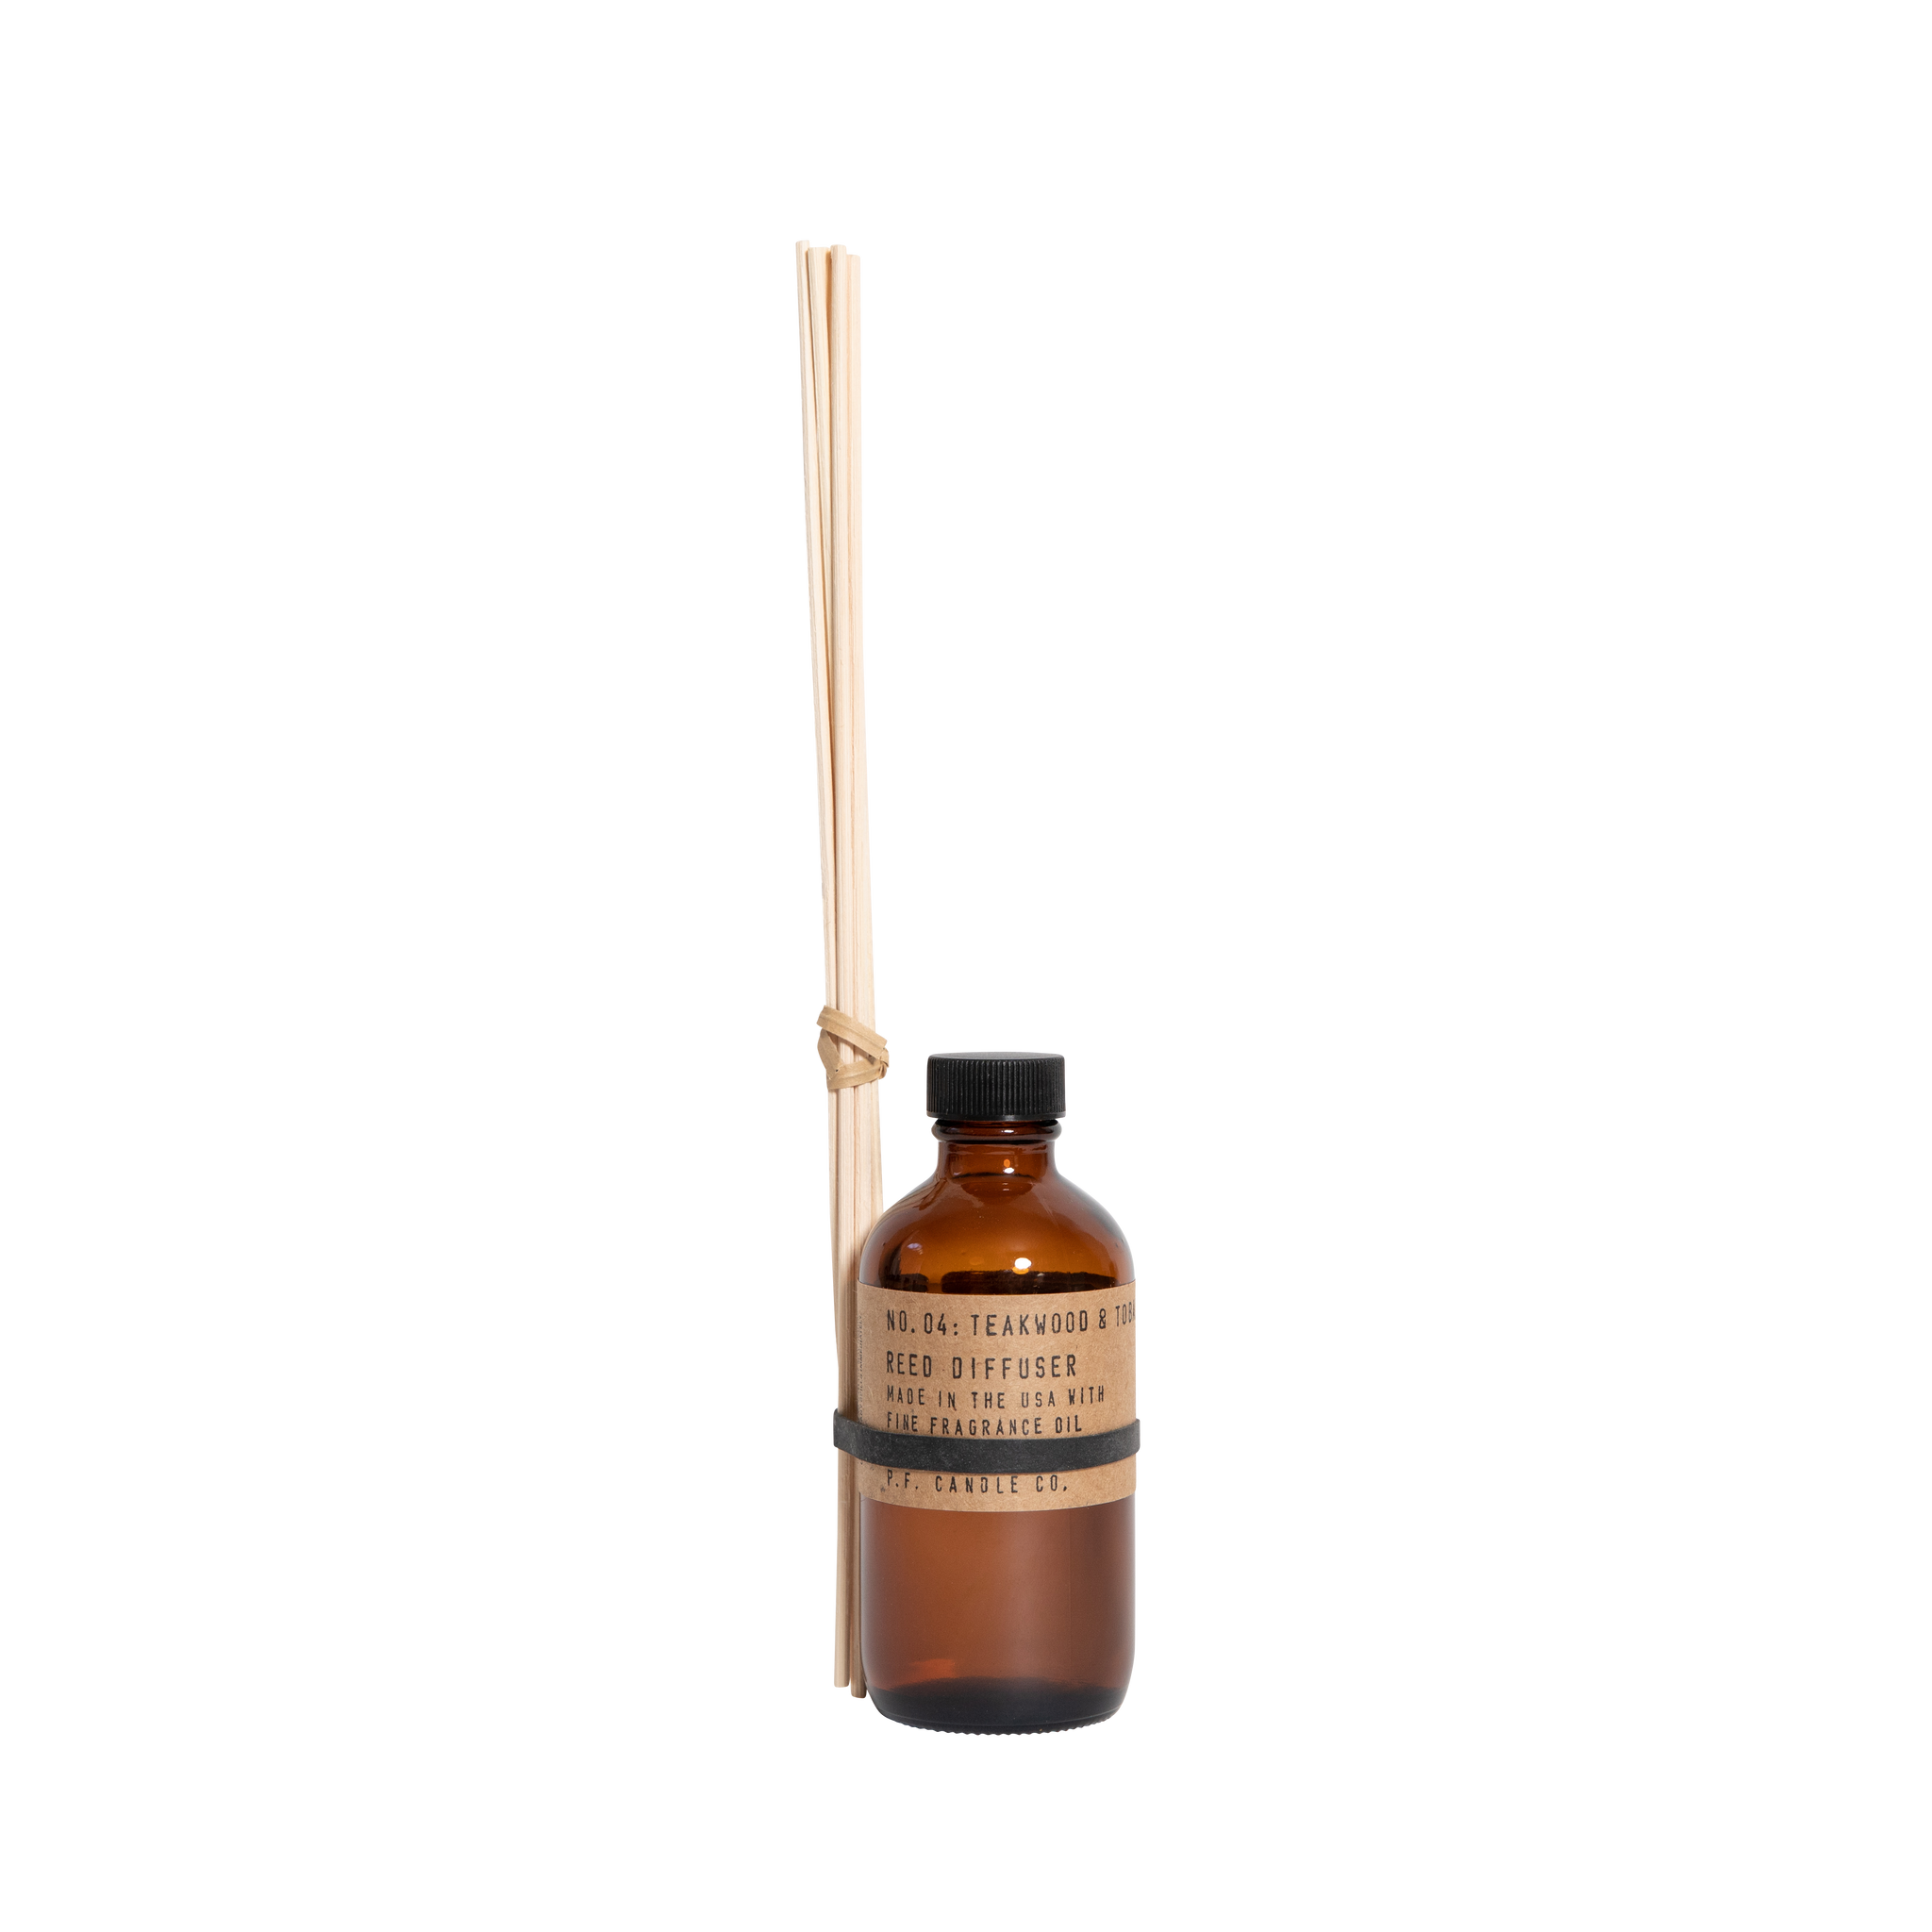 P.F. CANDLE CO. TEAKWOOD & TOBACCO 3.5 OZ REED DIFFUSER